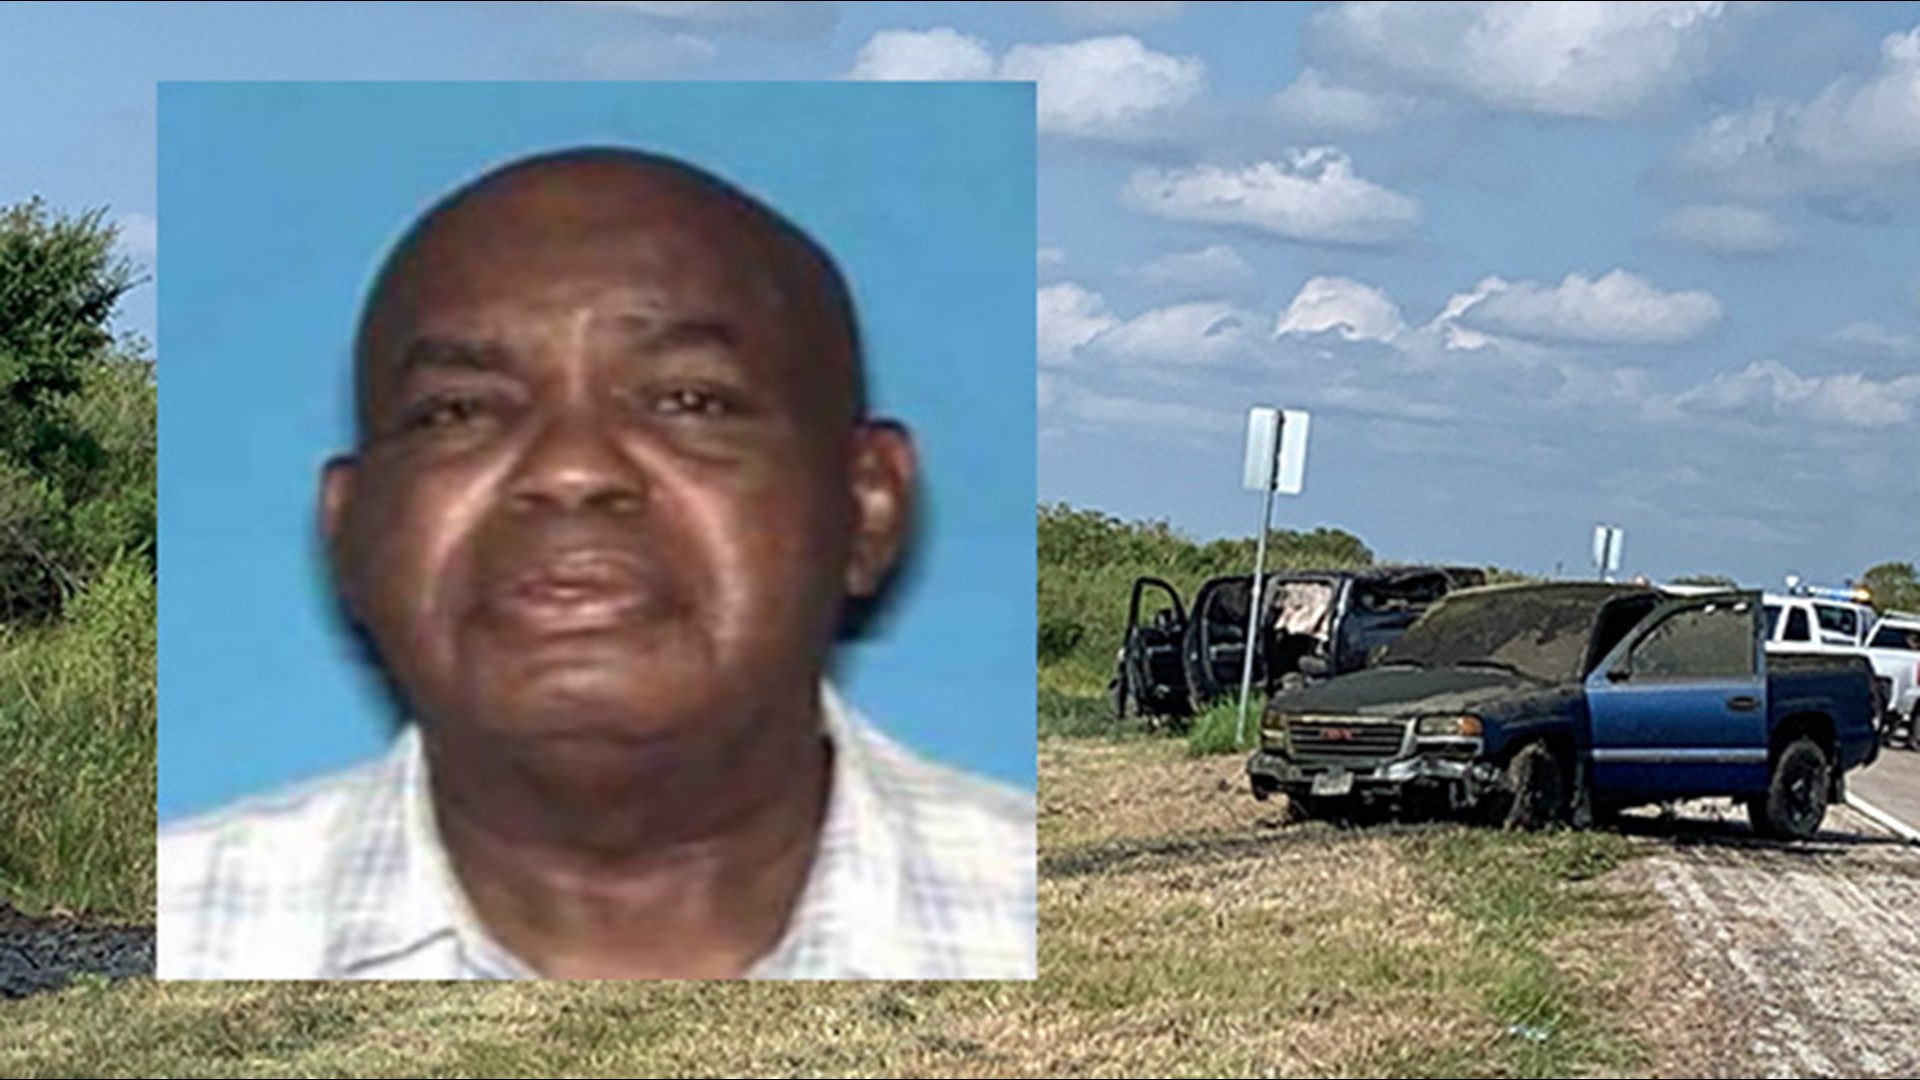 When police responded to a deadly accident, they found two more trucks underwater at the scene. The body of 80-year-old Joe McMillian was inside one of them.